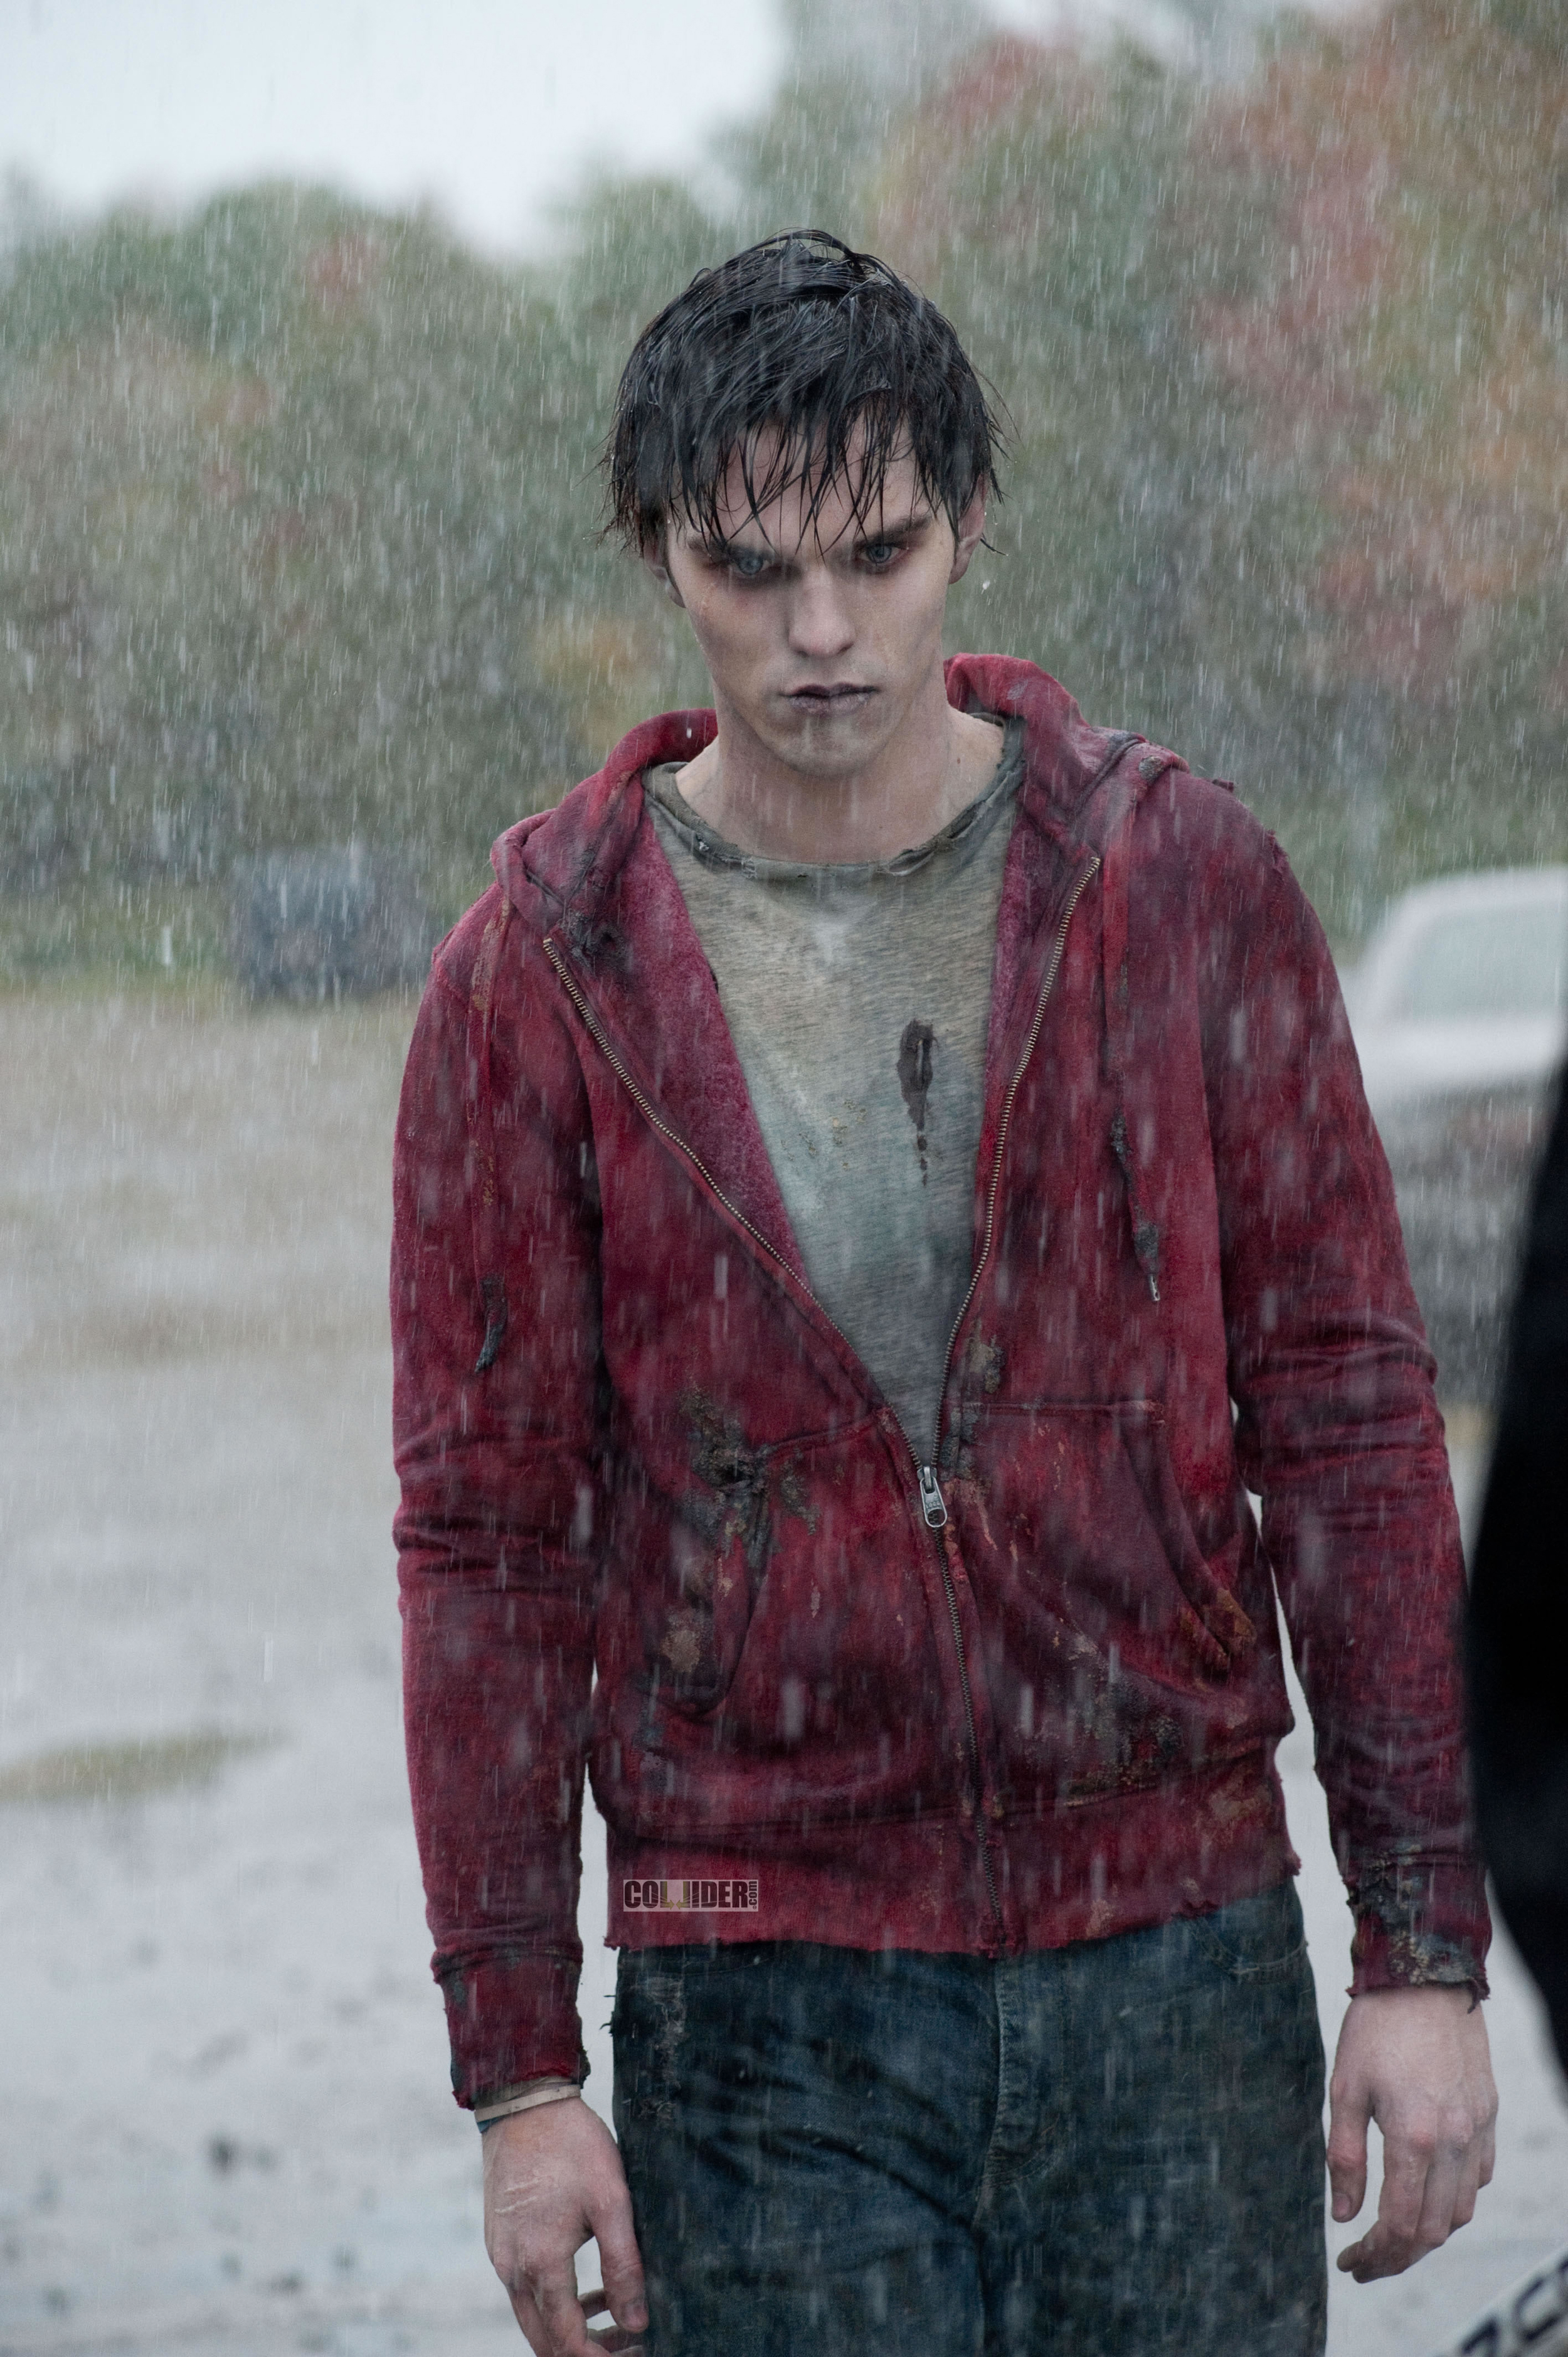 Warm Bodies Wallpapers